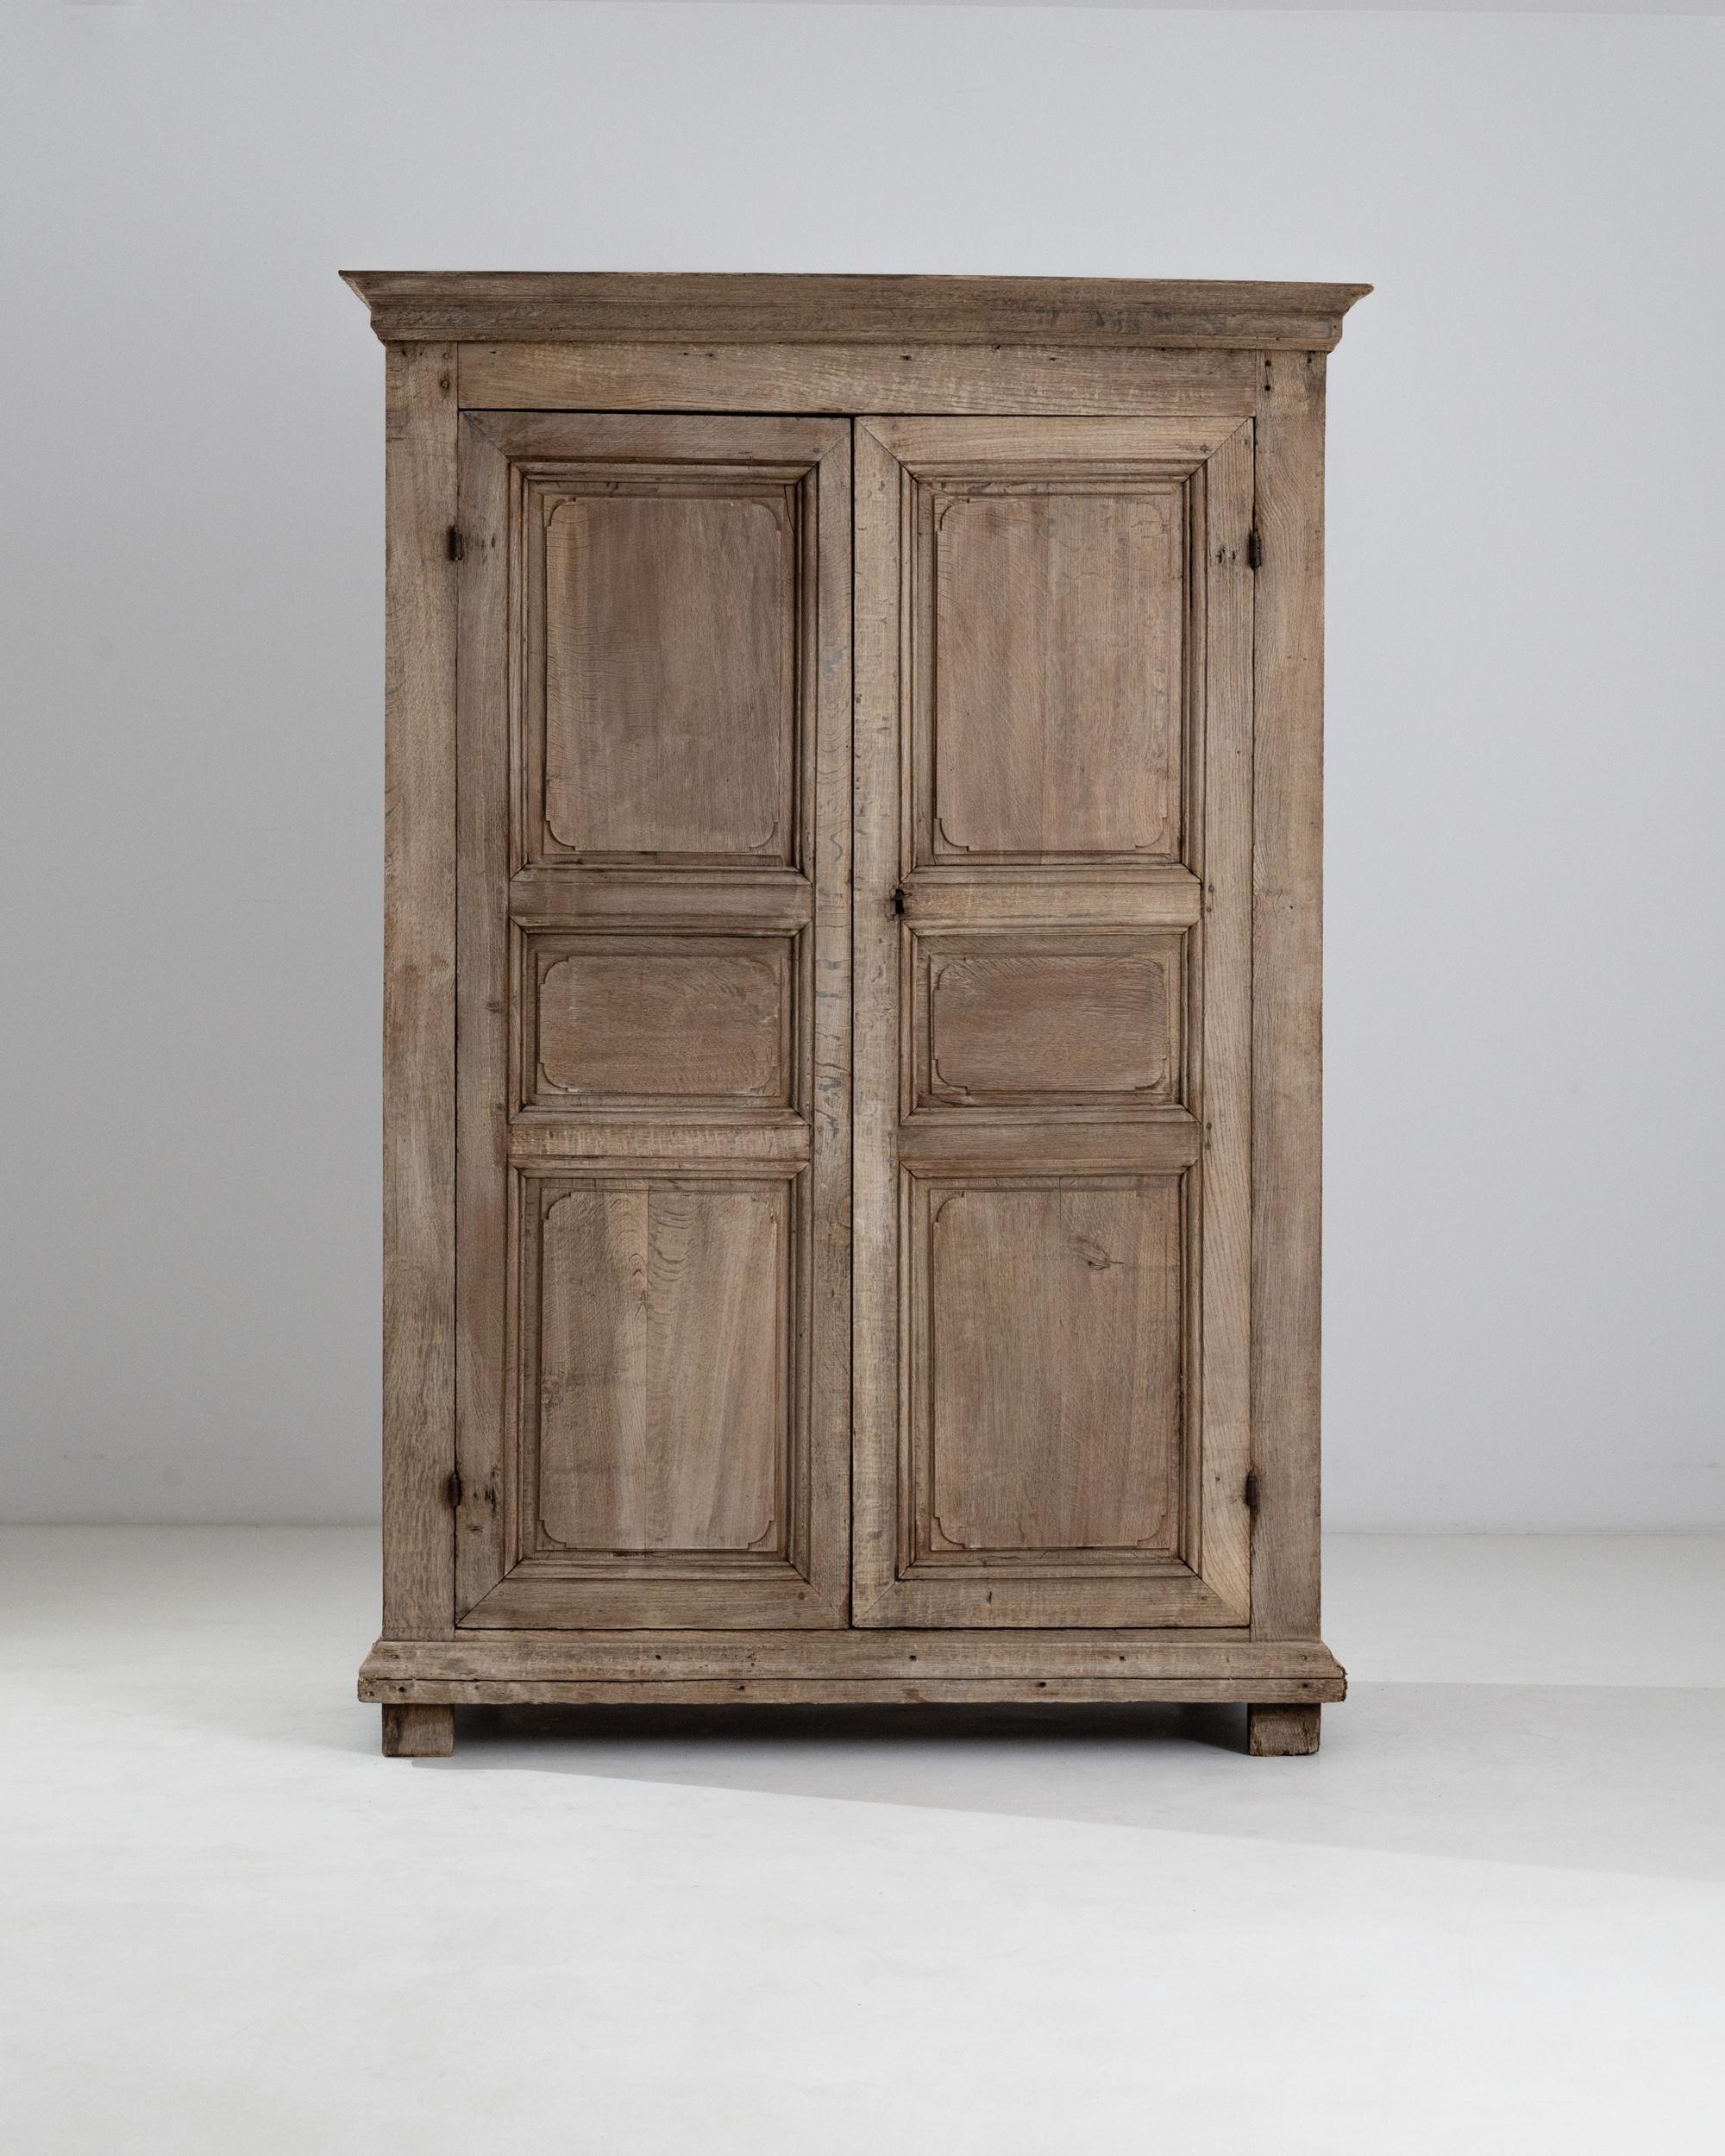 The clean, understated design of this antique oak cabinet gives it a perennial elegance. Made in France circa 1800, the discreet pegs of the mortise and tenon joinery are visible evidence of the masterful cabinetwork that has allowed this piece to